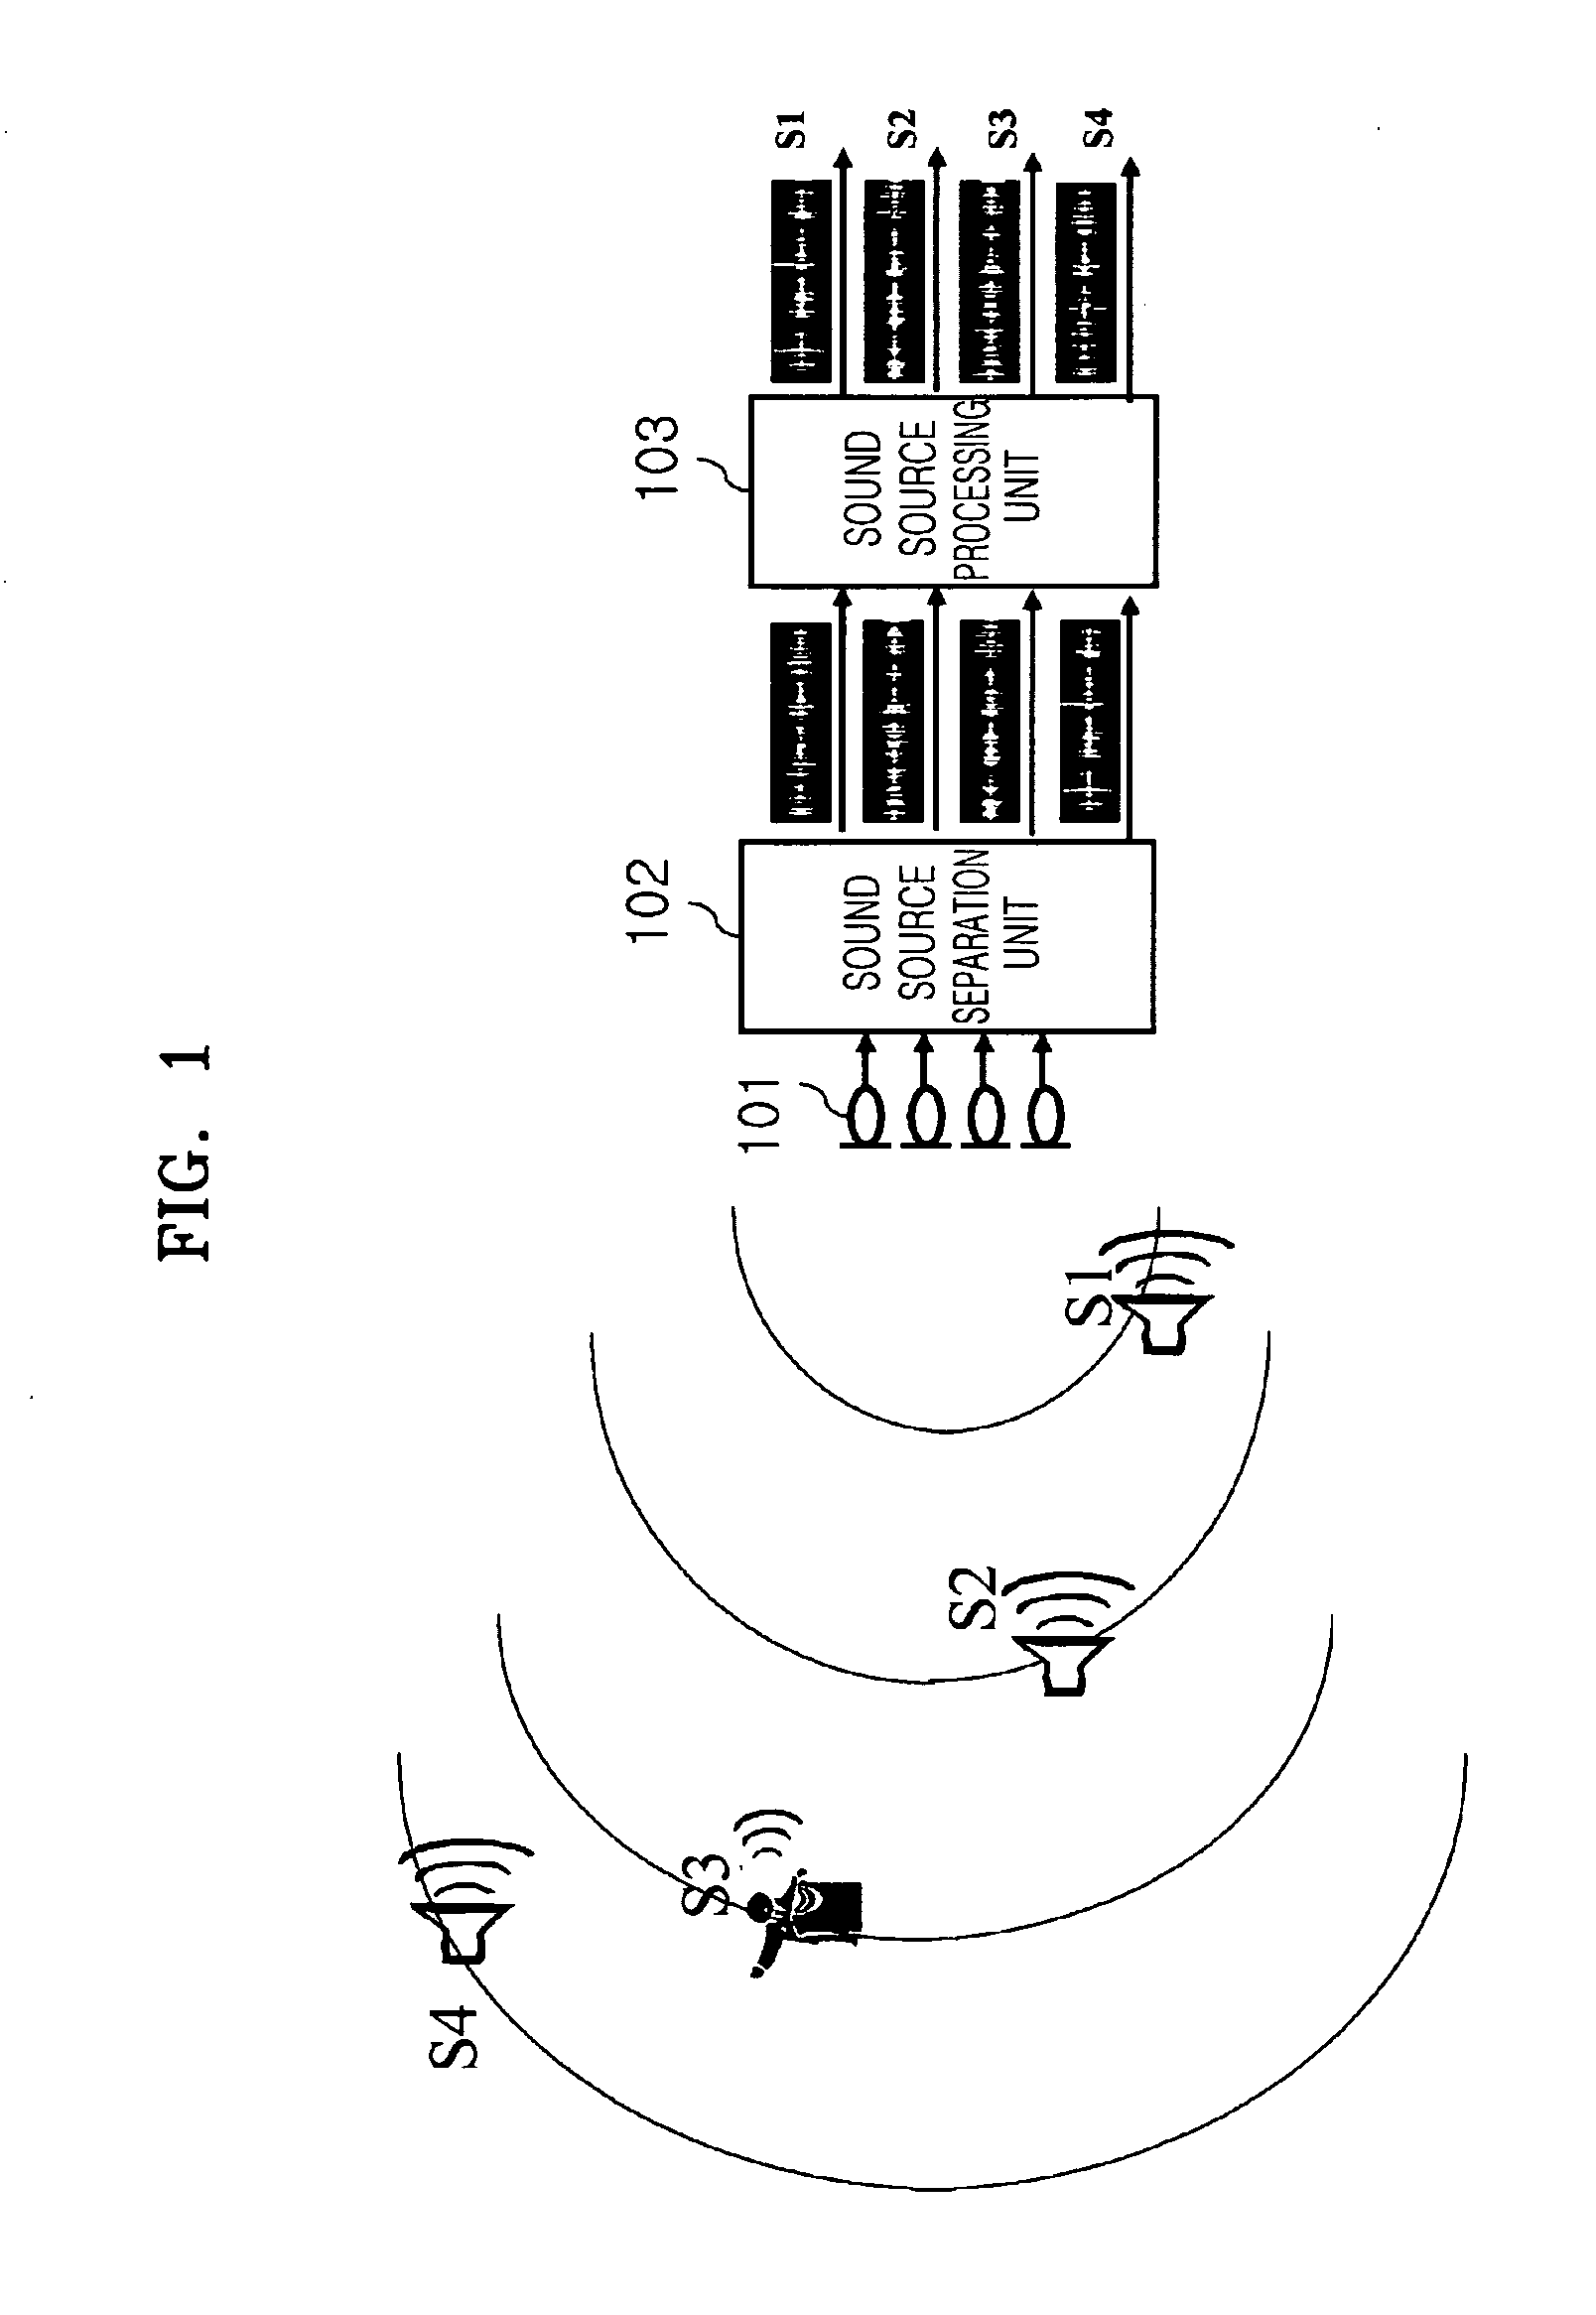 Method and apparatus for identifying sound sources from mixed sound signal